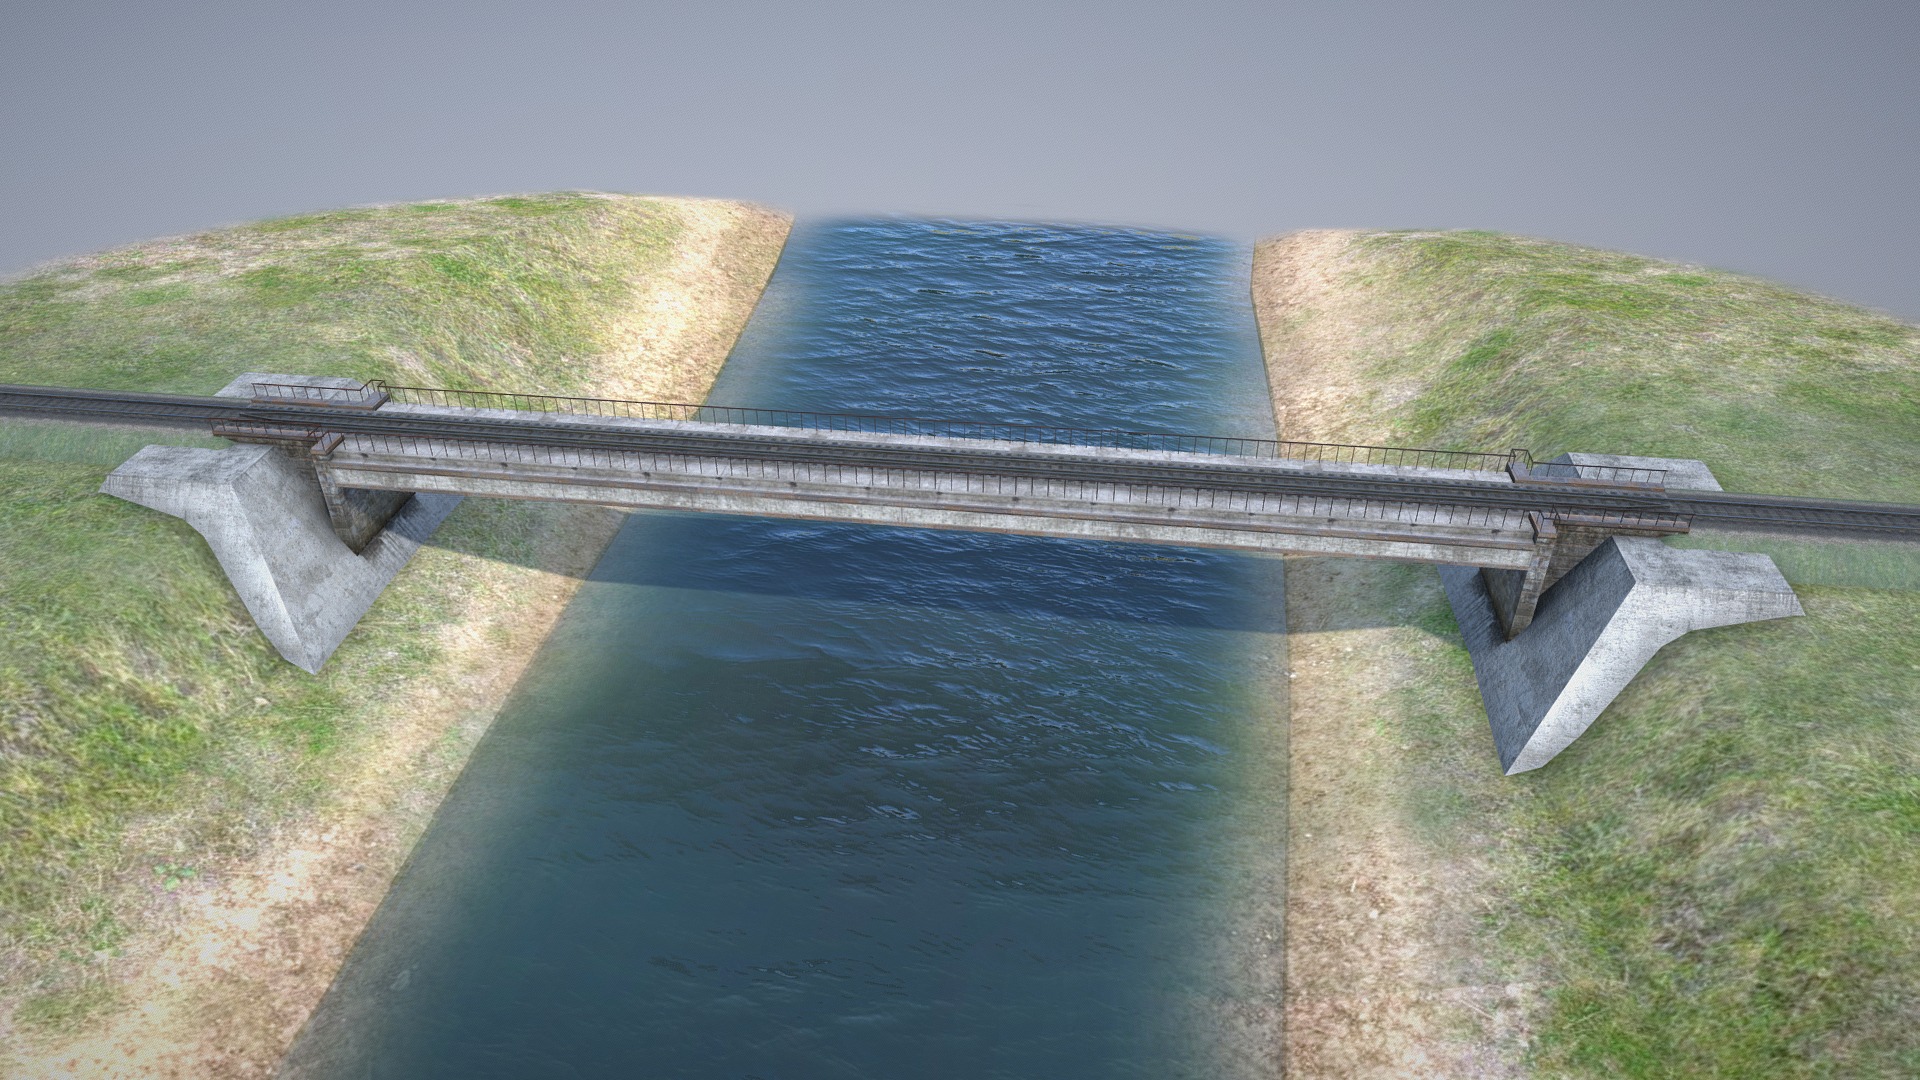 3D model RW Bridge Vologda-II mono - This is a 3D model of the RW Bridge Vologda-II mono. The 3D model is about a bridge over a body of water.